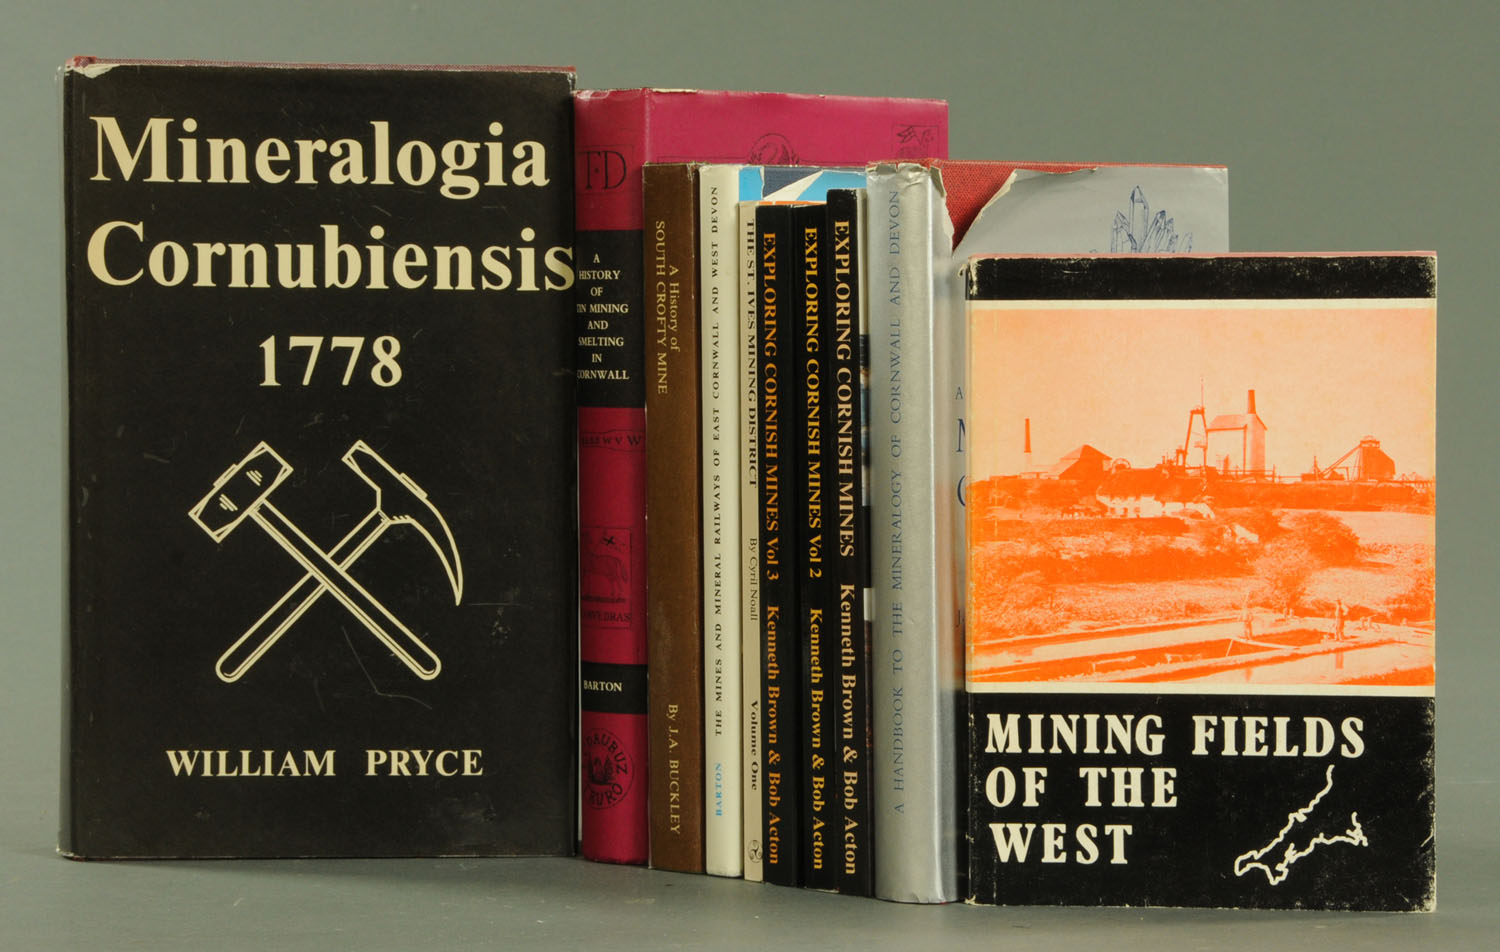 "Mining in The West Country", "Mineralogia Cornubienis" by William Pryce (1972),